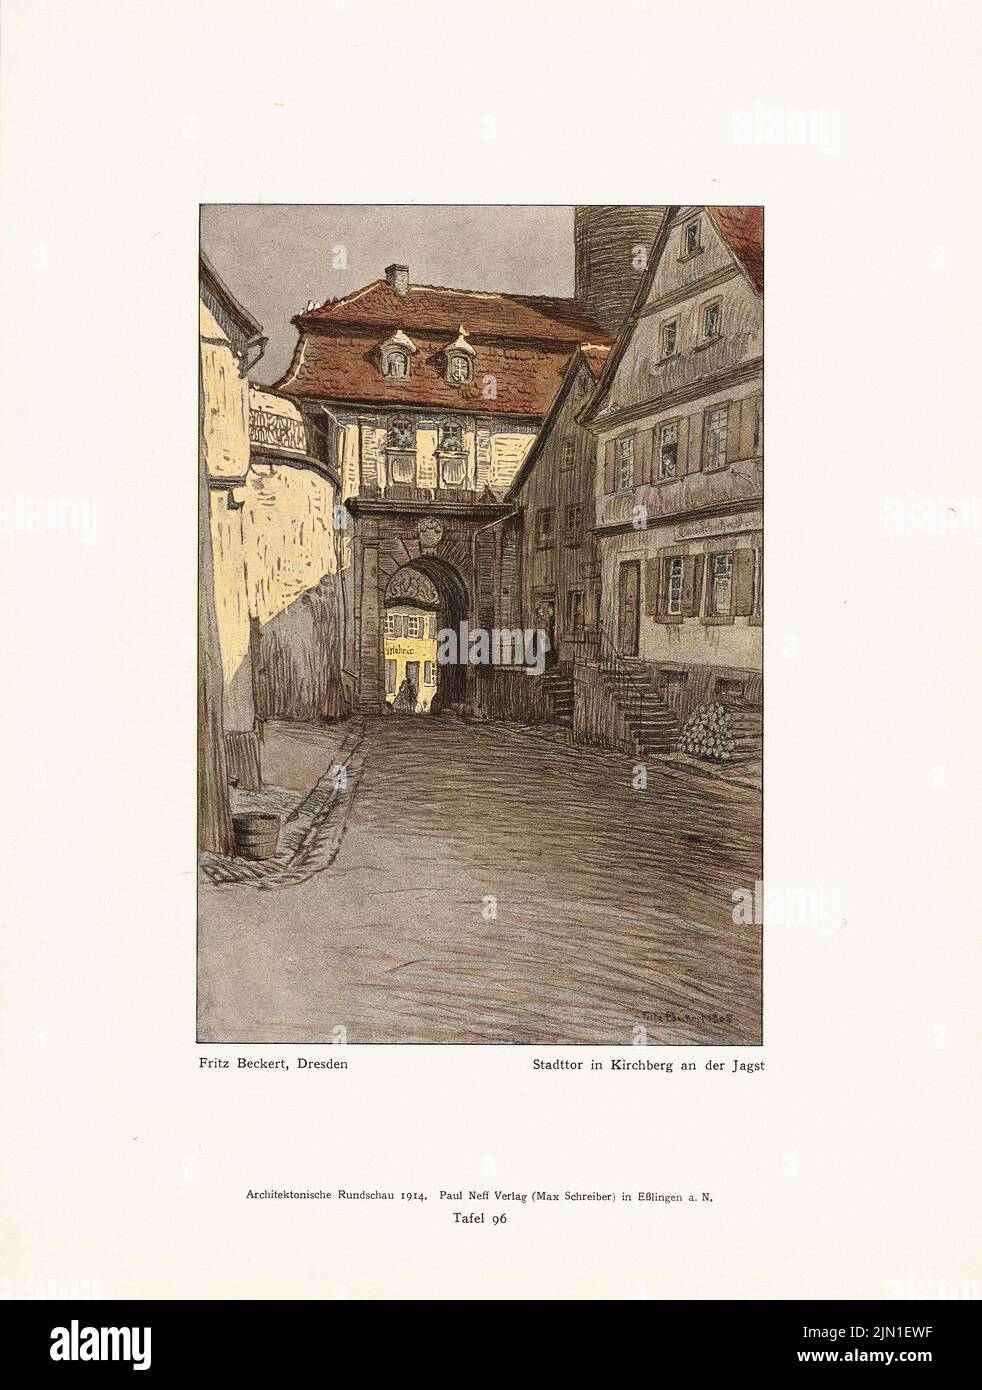 Beckert Fritz, city gate, Kirchberg/Jagst. (From: Architect. Rundschau, ed. V. Eisenlohr & Weigle, 1914) (1905): Perspective view. Print colored on paper, 32.5 x 24.6 cm (including scan edges) Beckert Fritz : Stadttor, Kirchberg/Jagst. (Aus: Architekt. Rundschau, hrsg.v. Eisenlohr & Weigle, 1914) Stock Photo